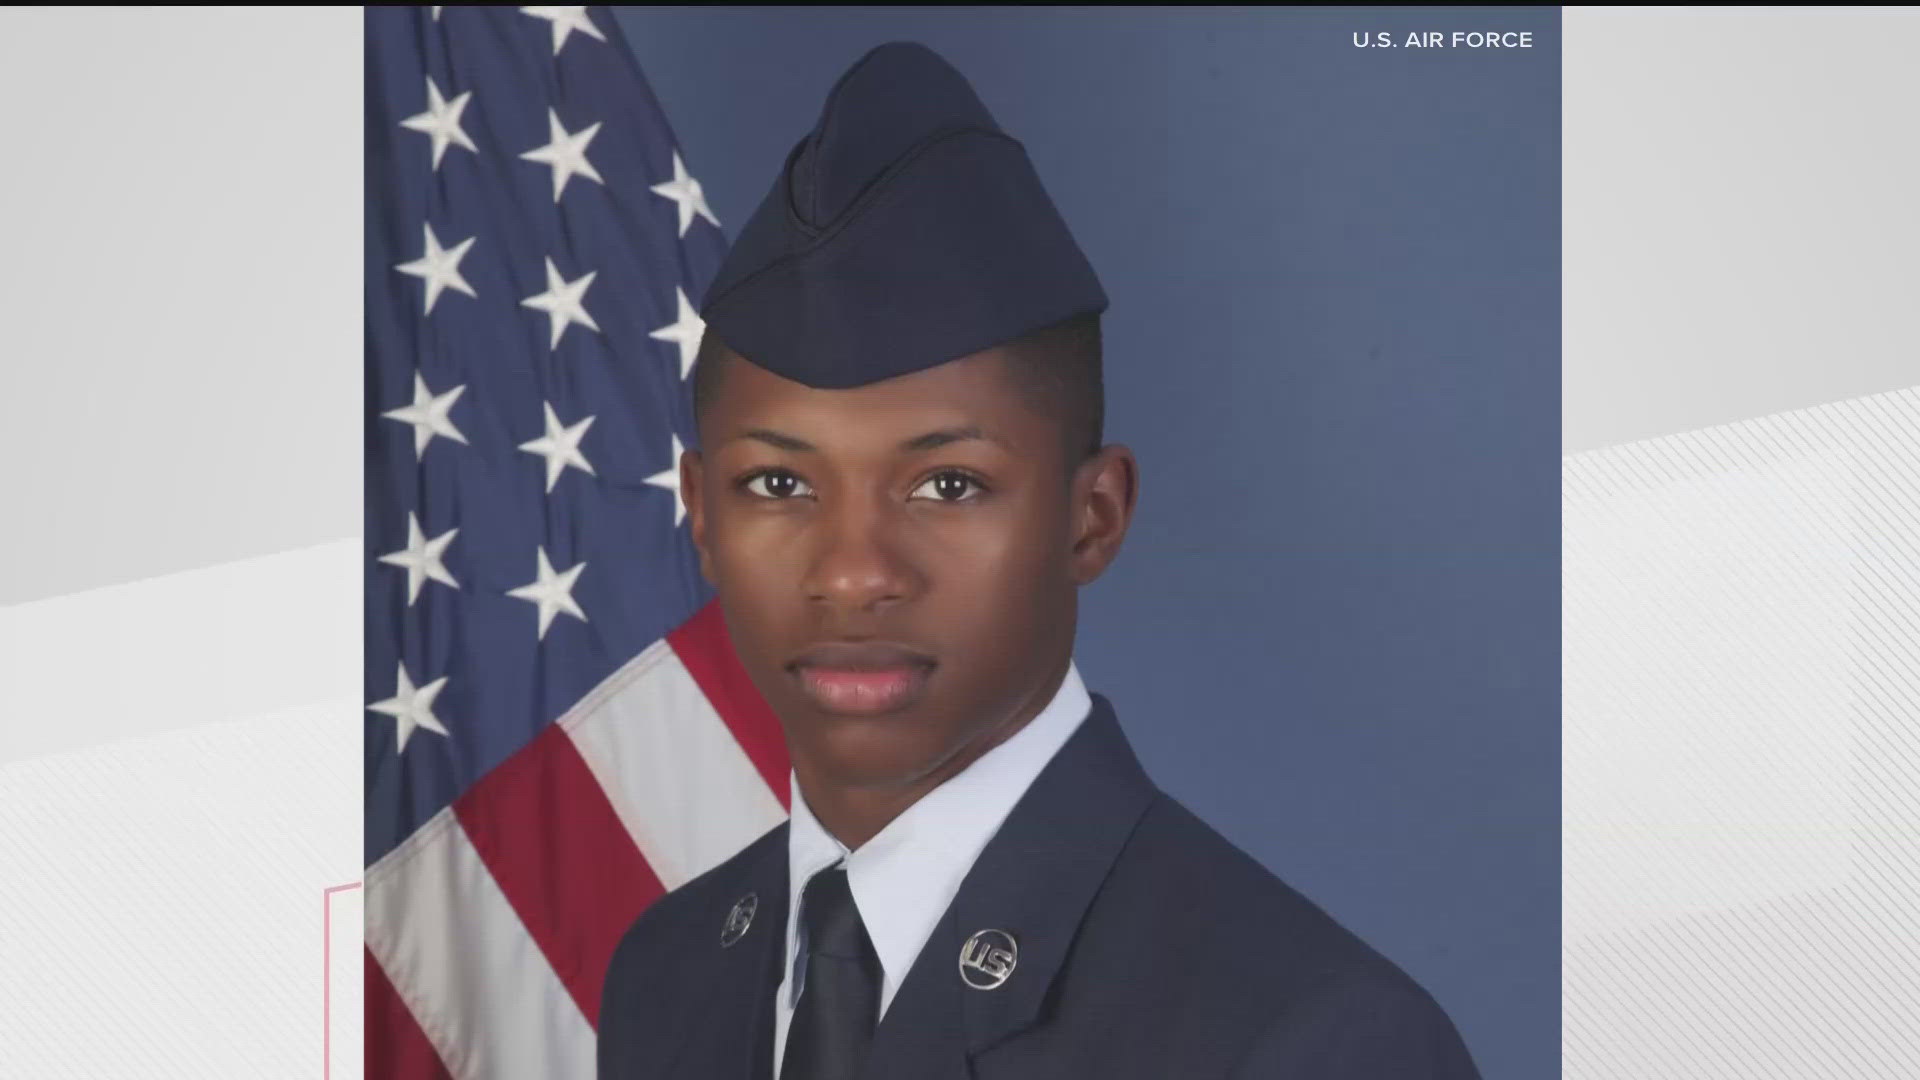 Deputies responding to a disturbance call at a Florida apartment complex burst into the wrong unit and fatally shot a Black U.S. Air Force airman who was home alone.